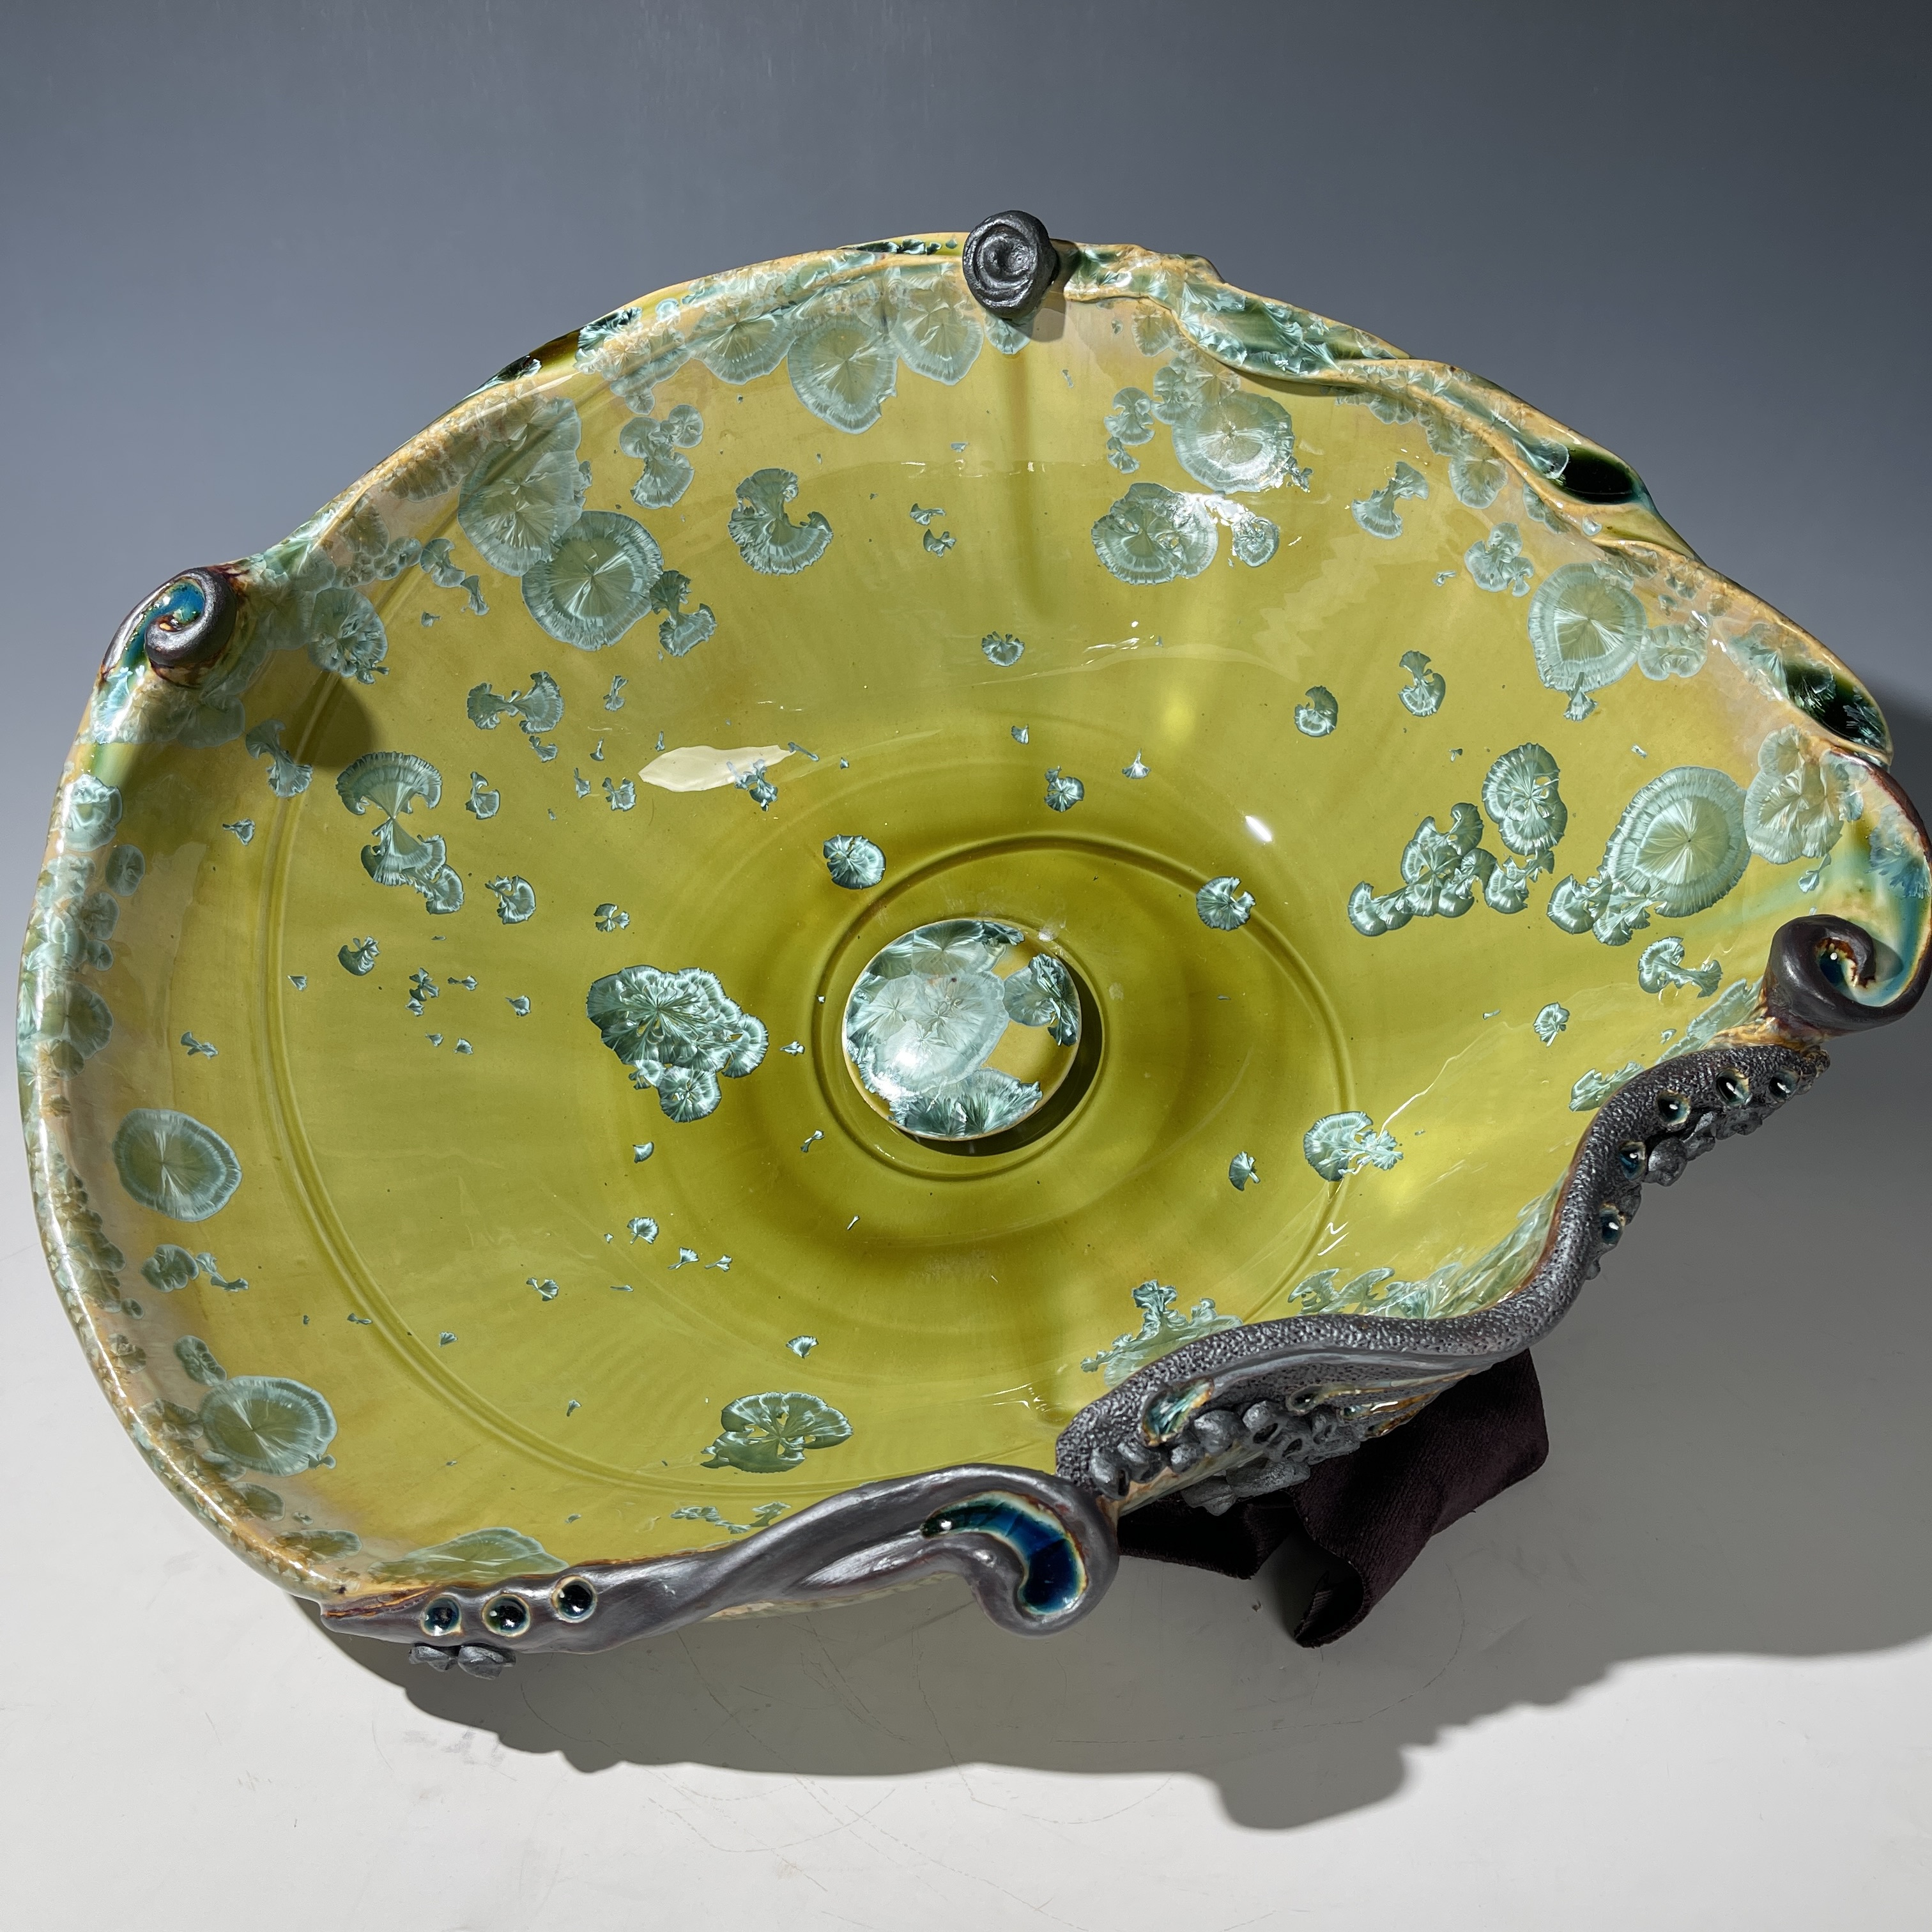 Ovoid Shaped Basin Sink in green crystal with swirling sculptural details